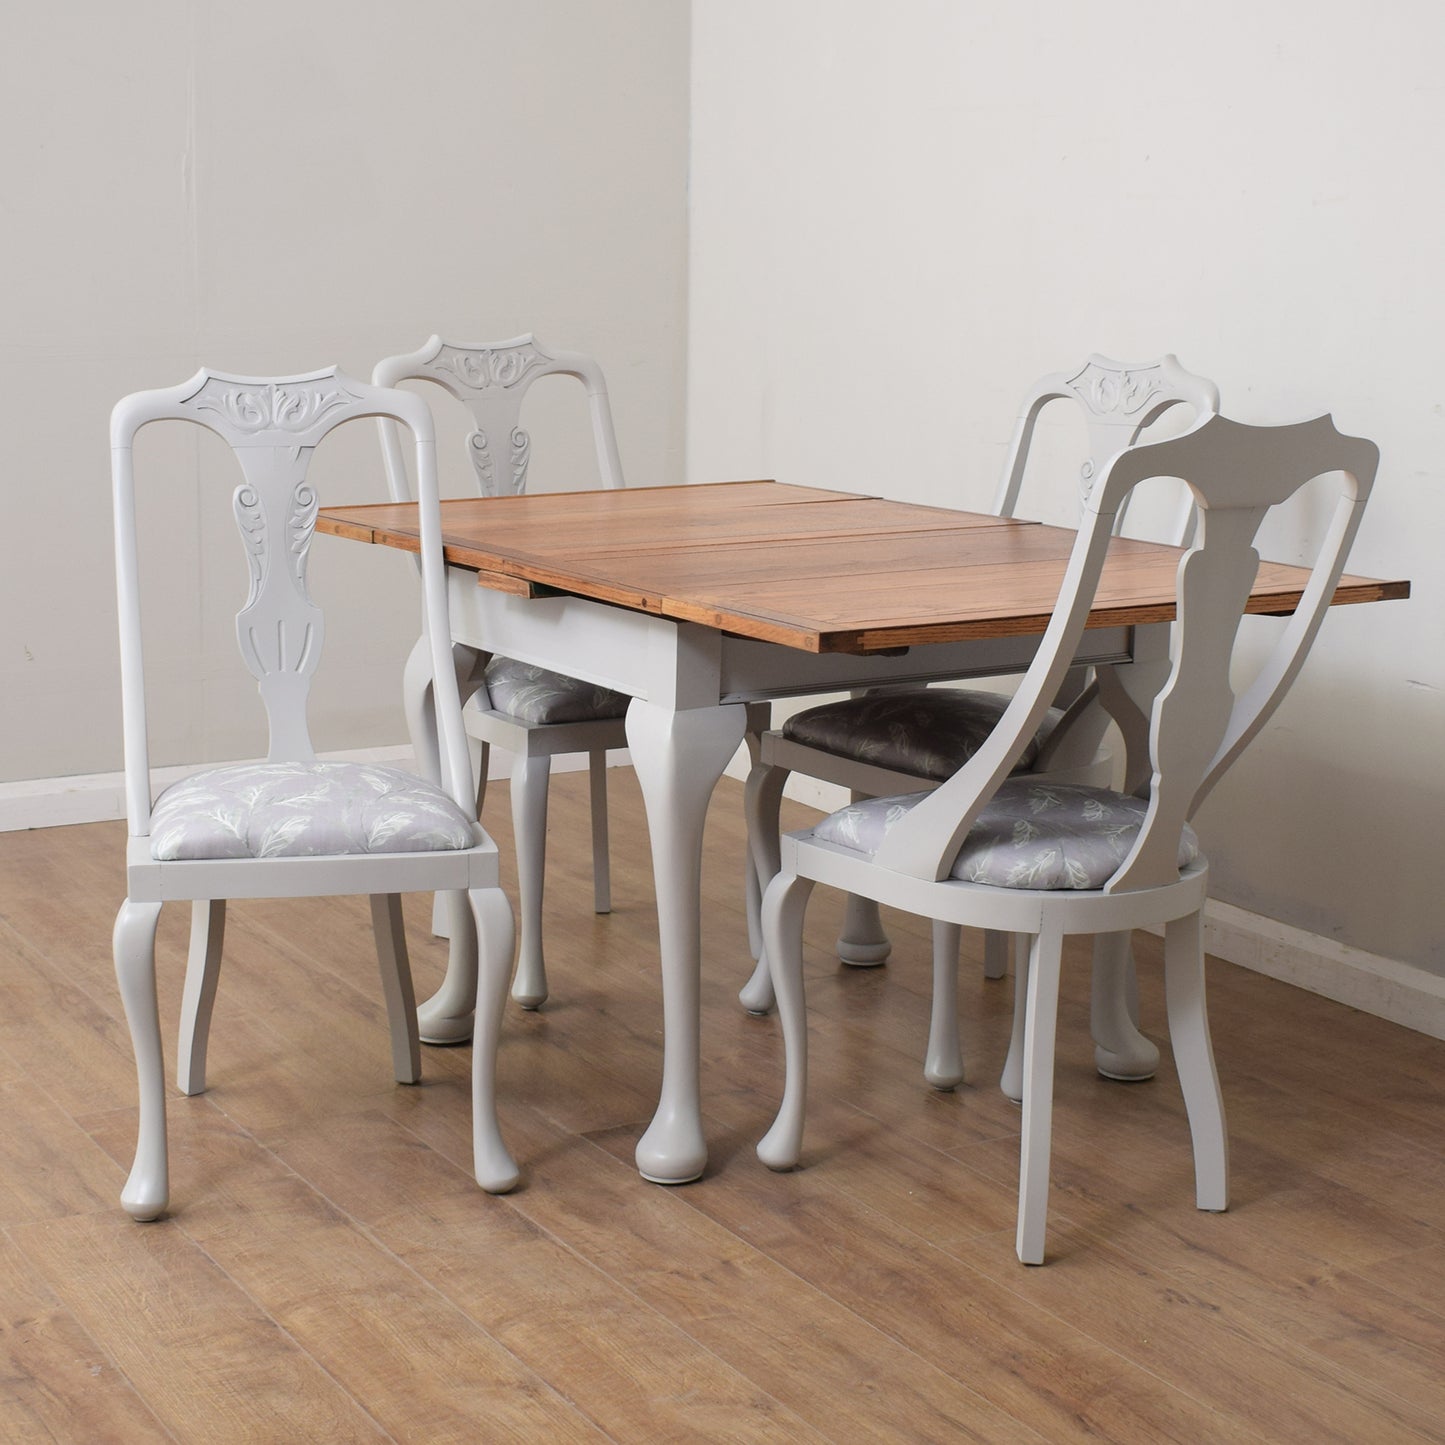 Vintage Draw-Leaf Table & Four Chairs